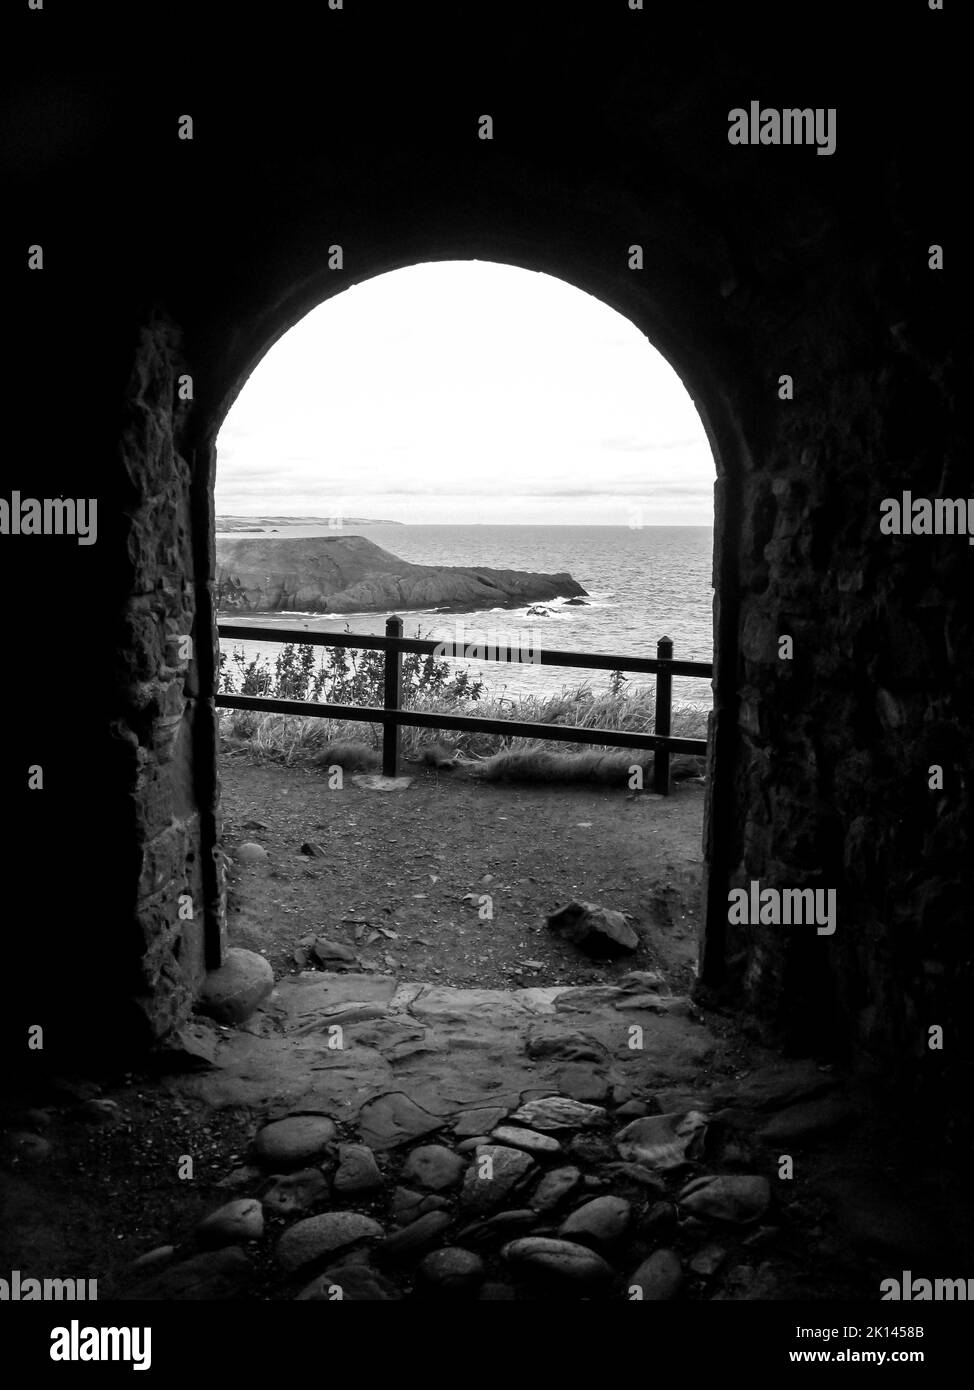 Looking through an old doorway towards Scotland’s North Sea coast, in Black and White. Stock Photo